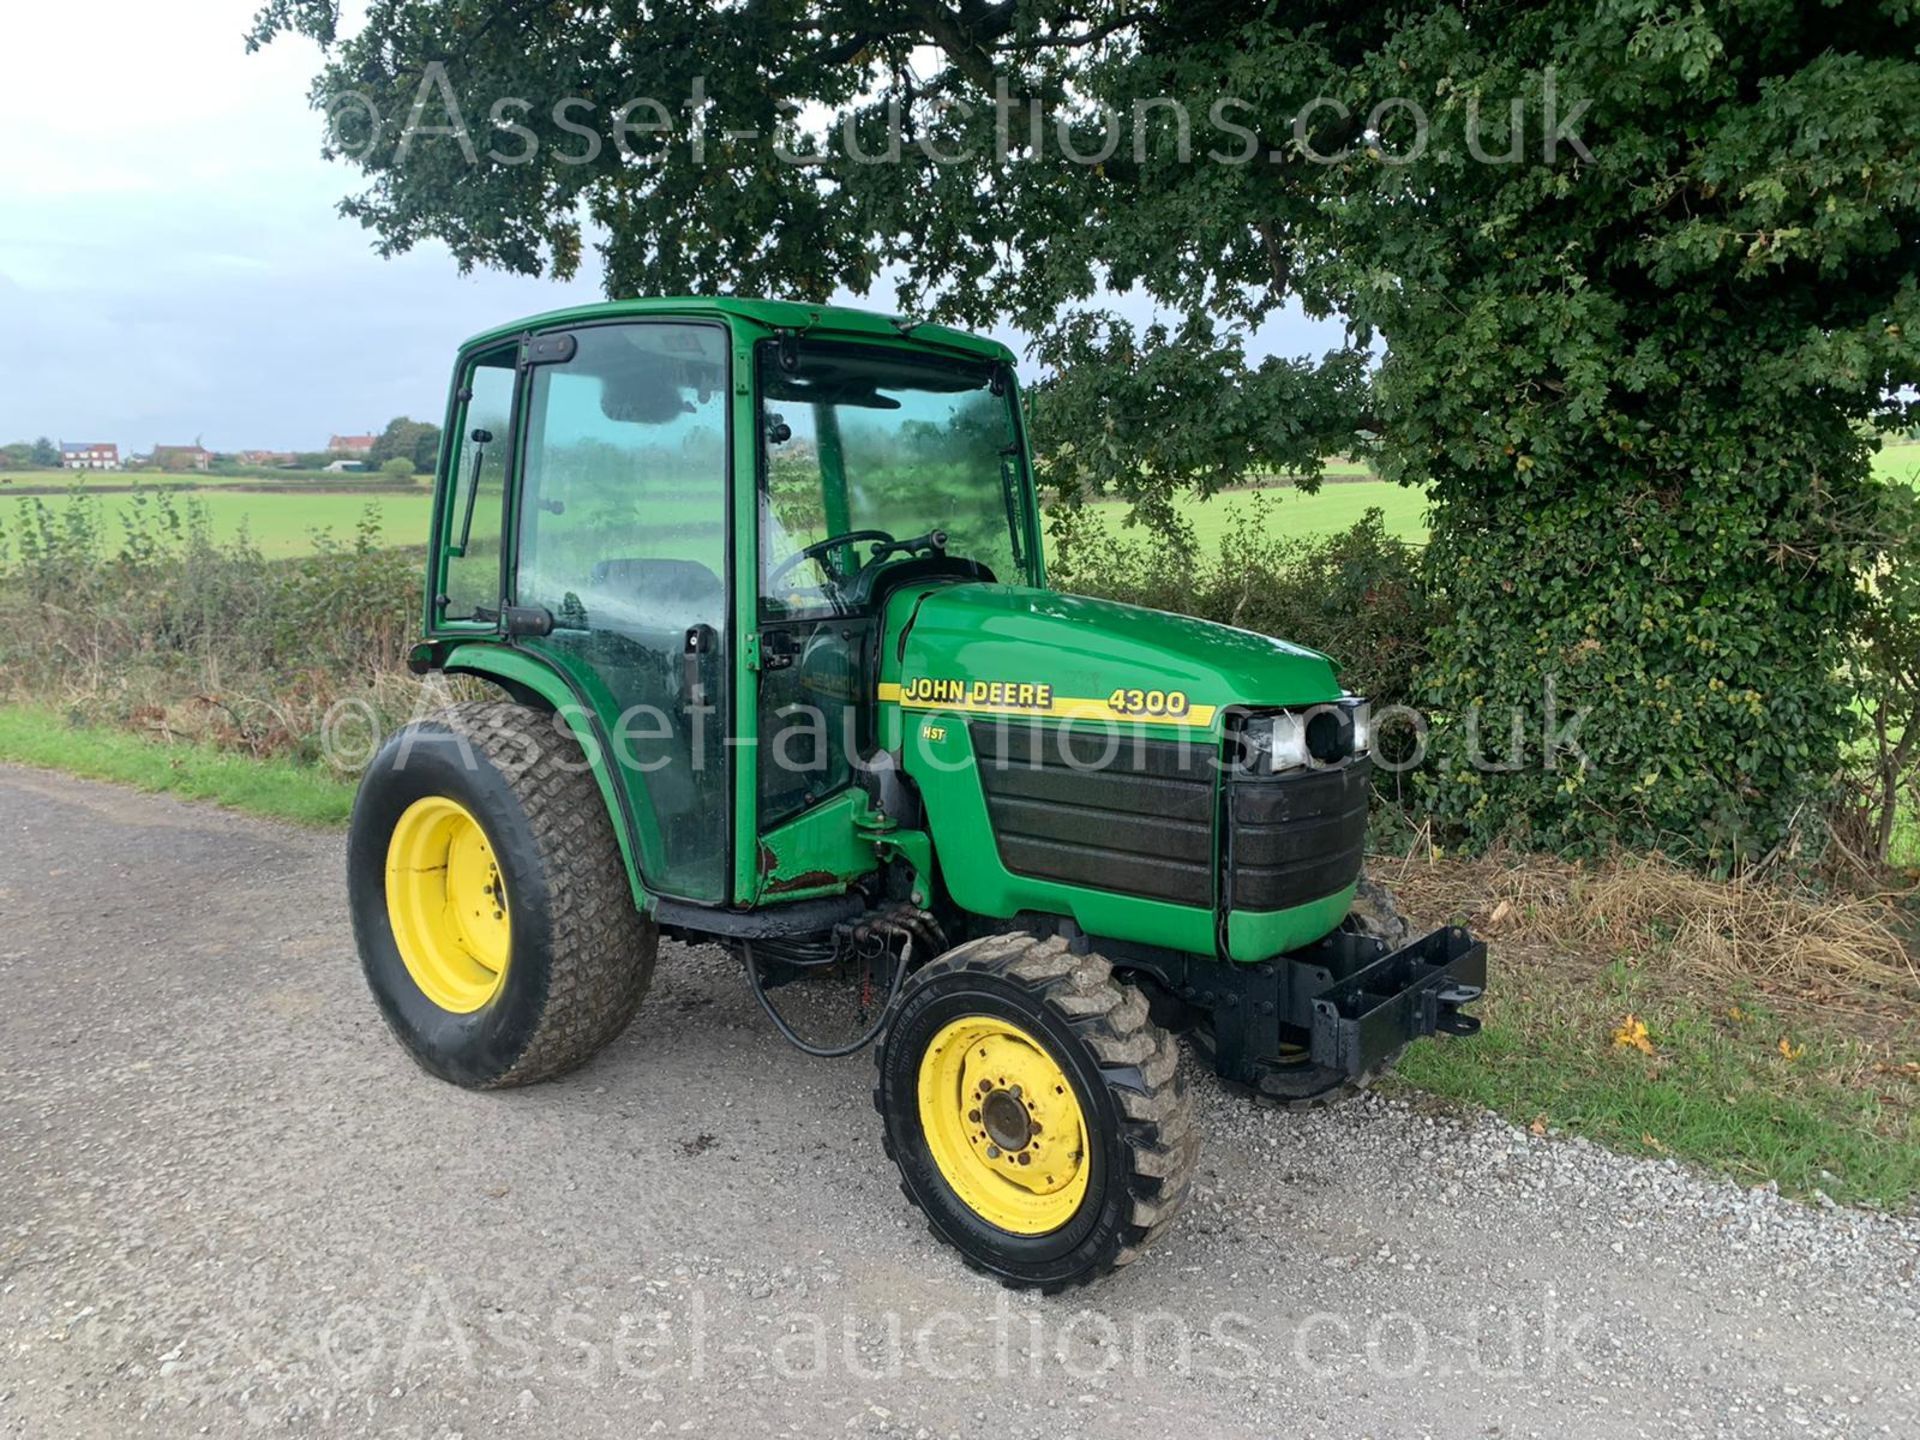 JOHN DEERE 4300 32hp 4WD COMPACT TRACTOR, RUNS DRIVES AND WORKS, CABBED, REAR TOW, ROAD KIT - Image 2 of 9